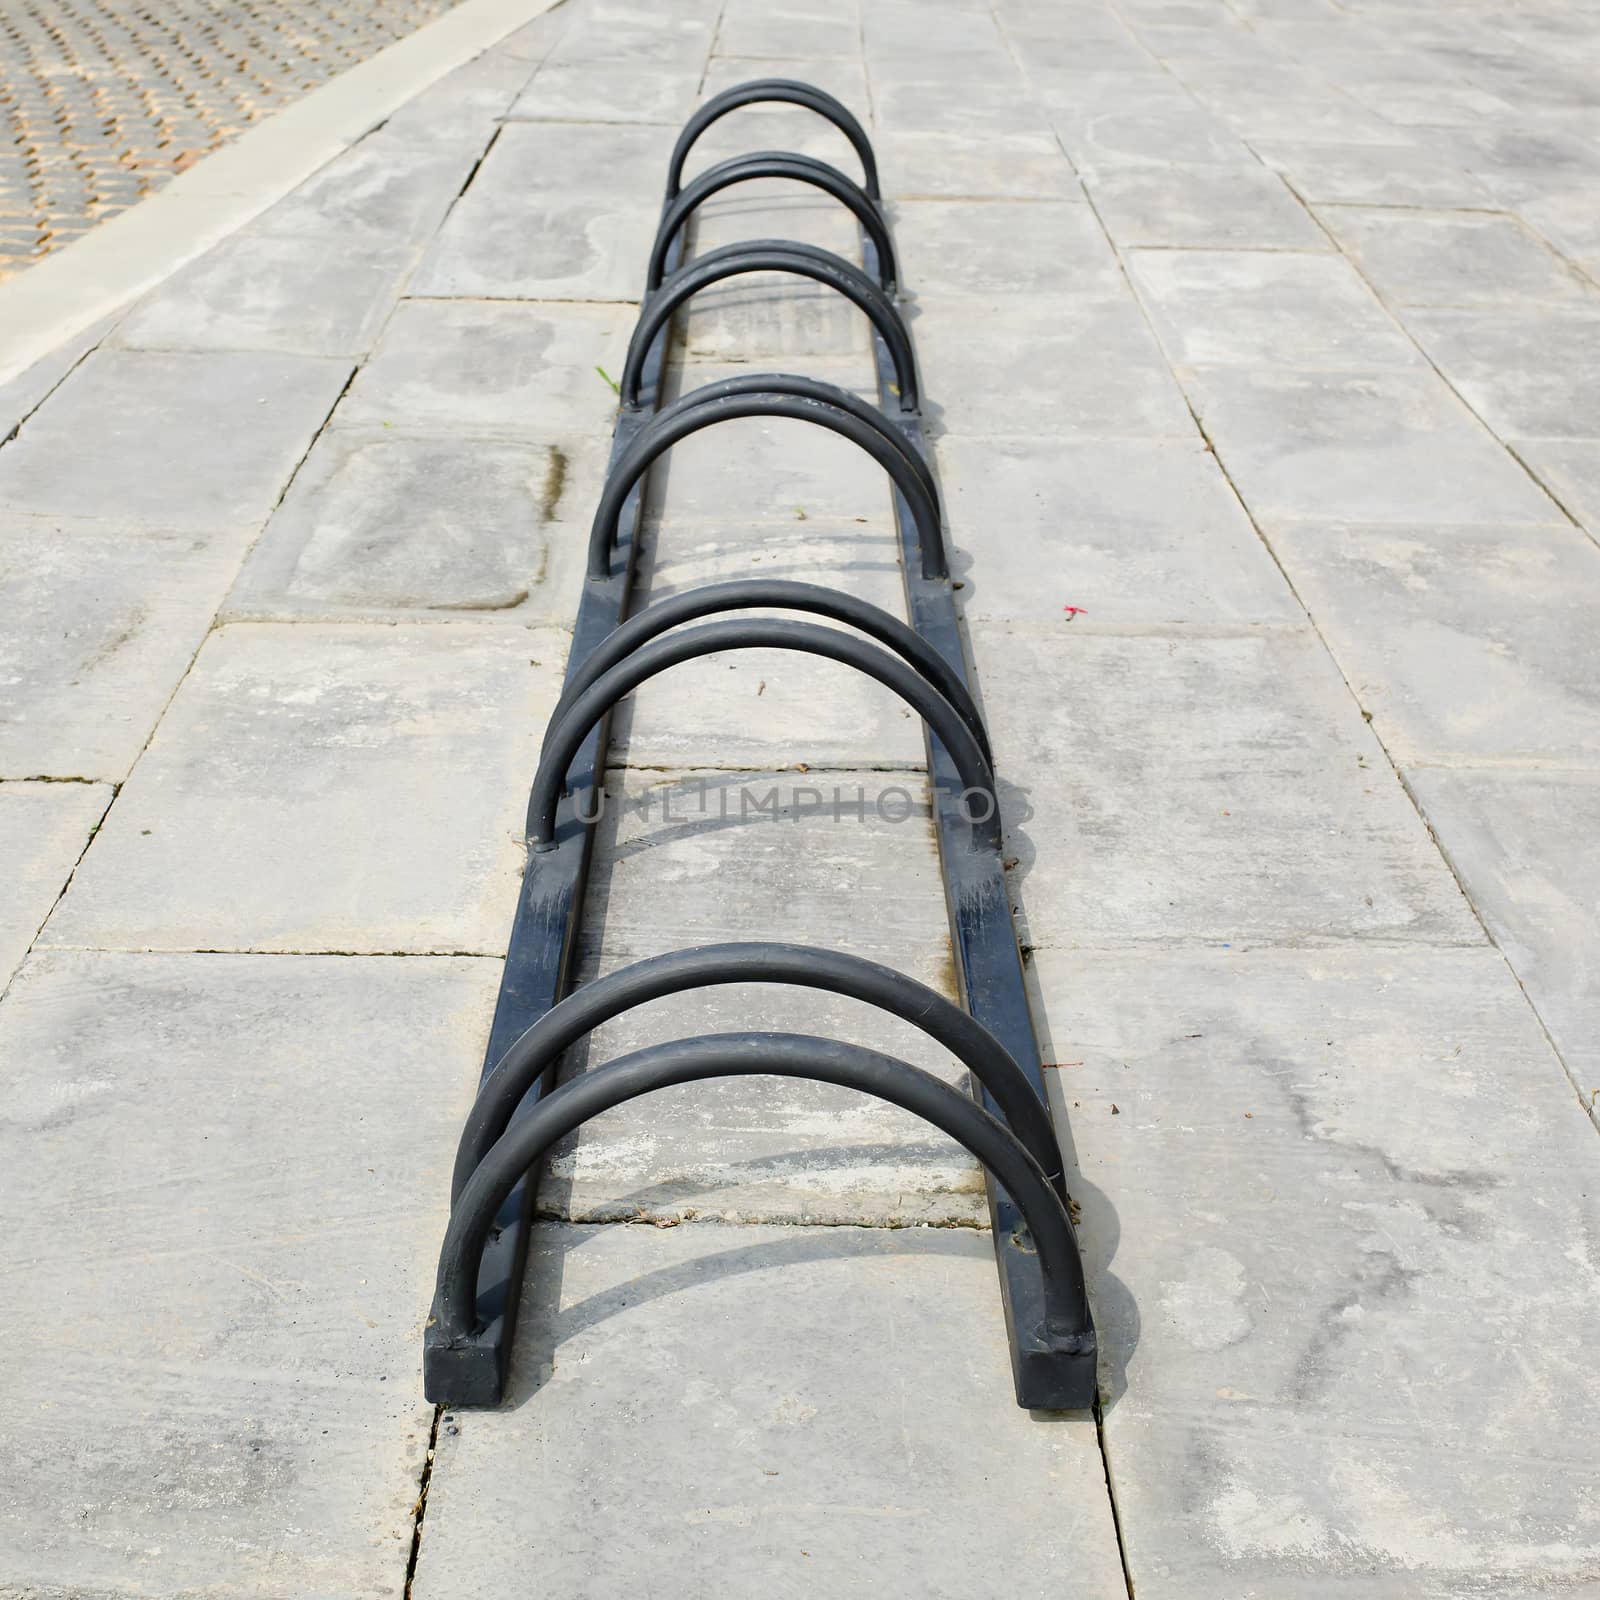 Abstract of bicycle parking